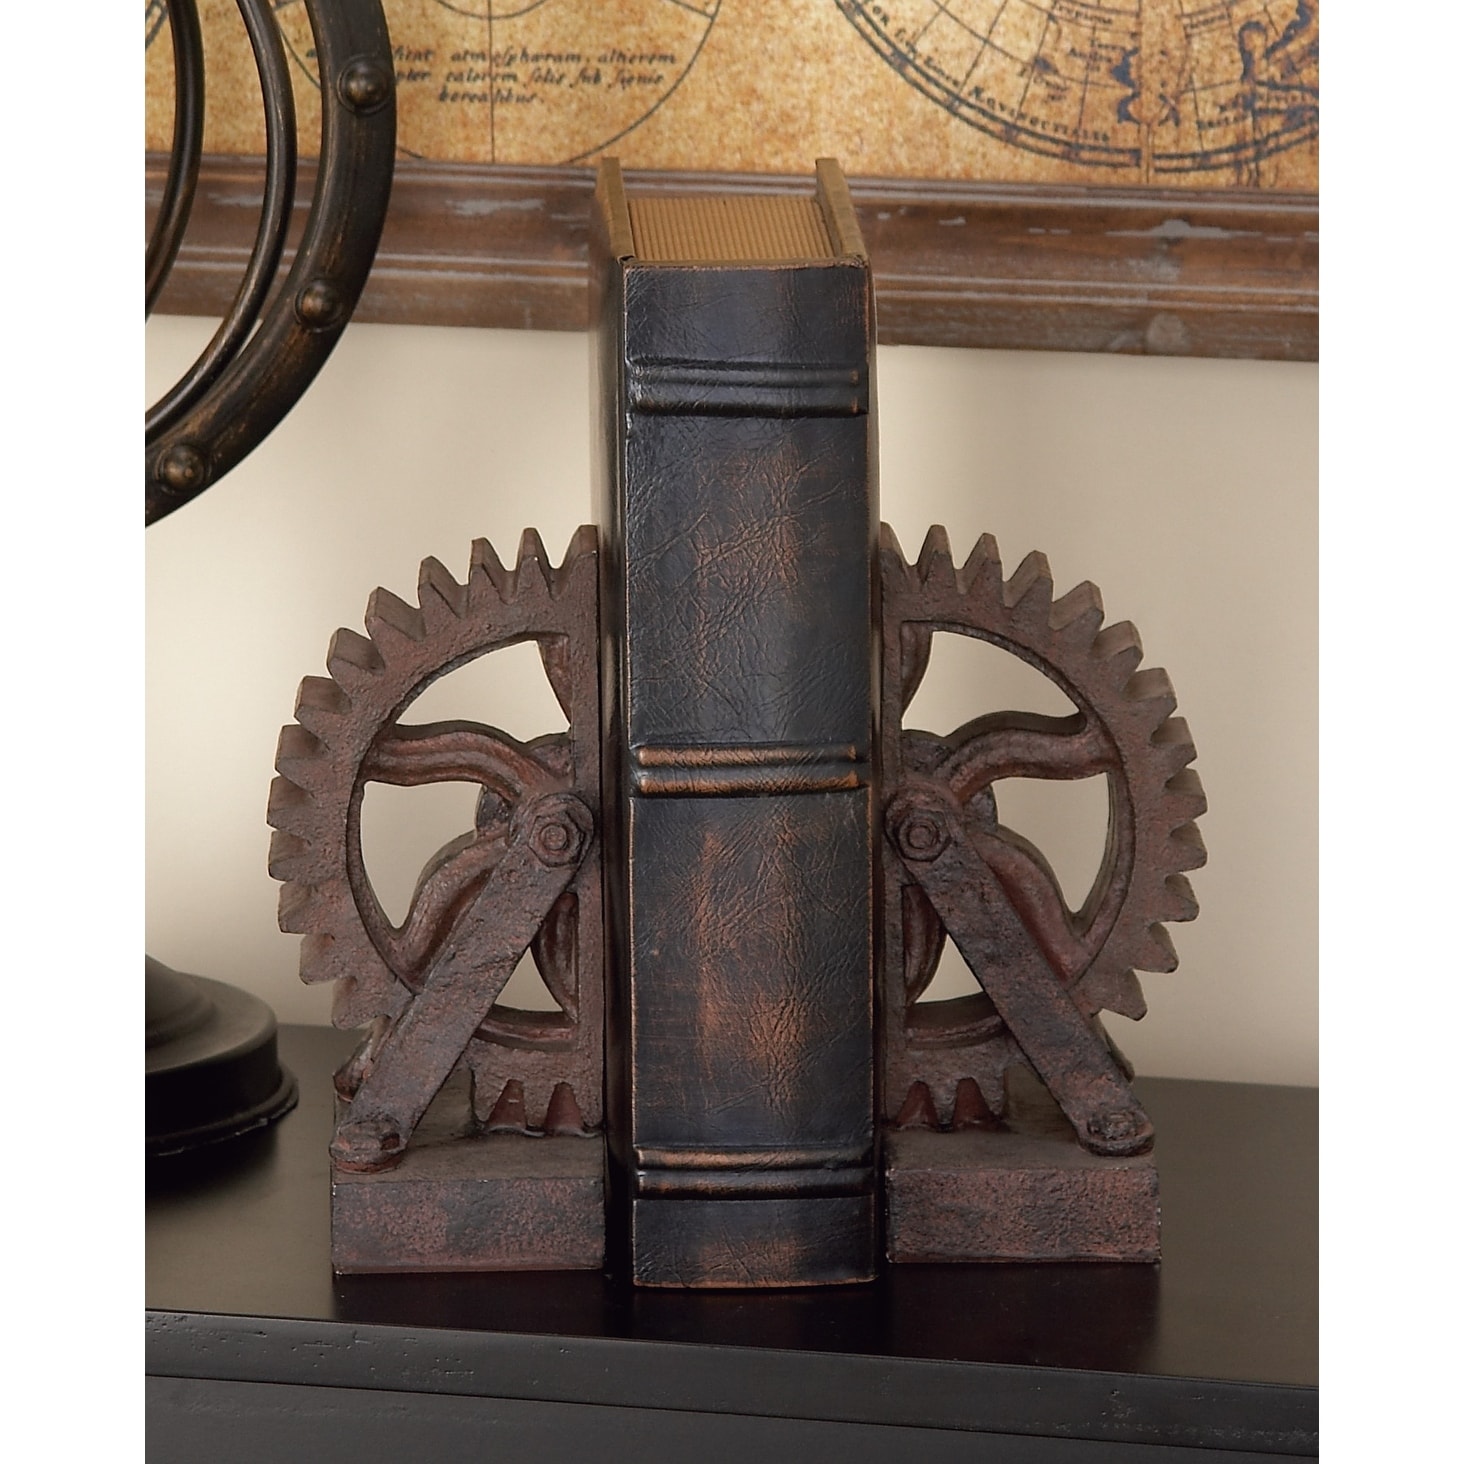 Industrial Gear Bookends Metal Look Rustic Antique SteamPunk Chic Decor Set of 2 